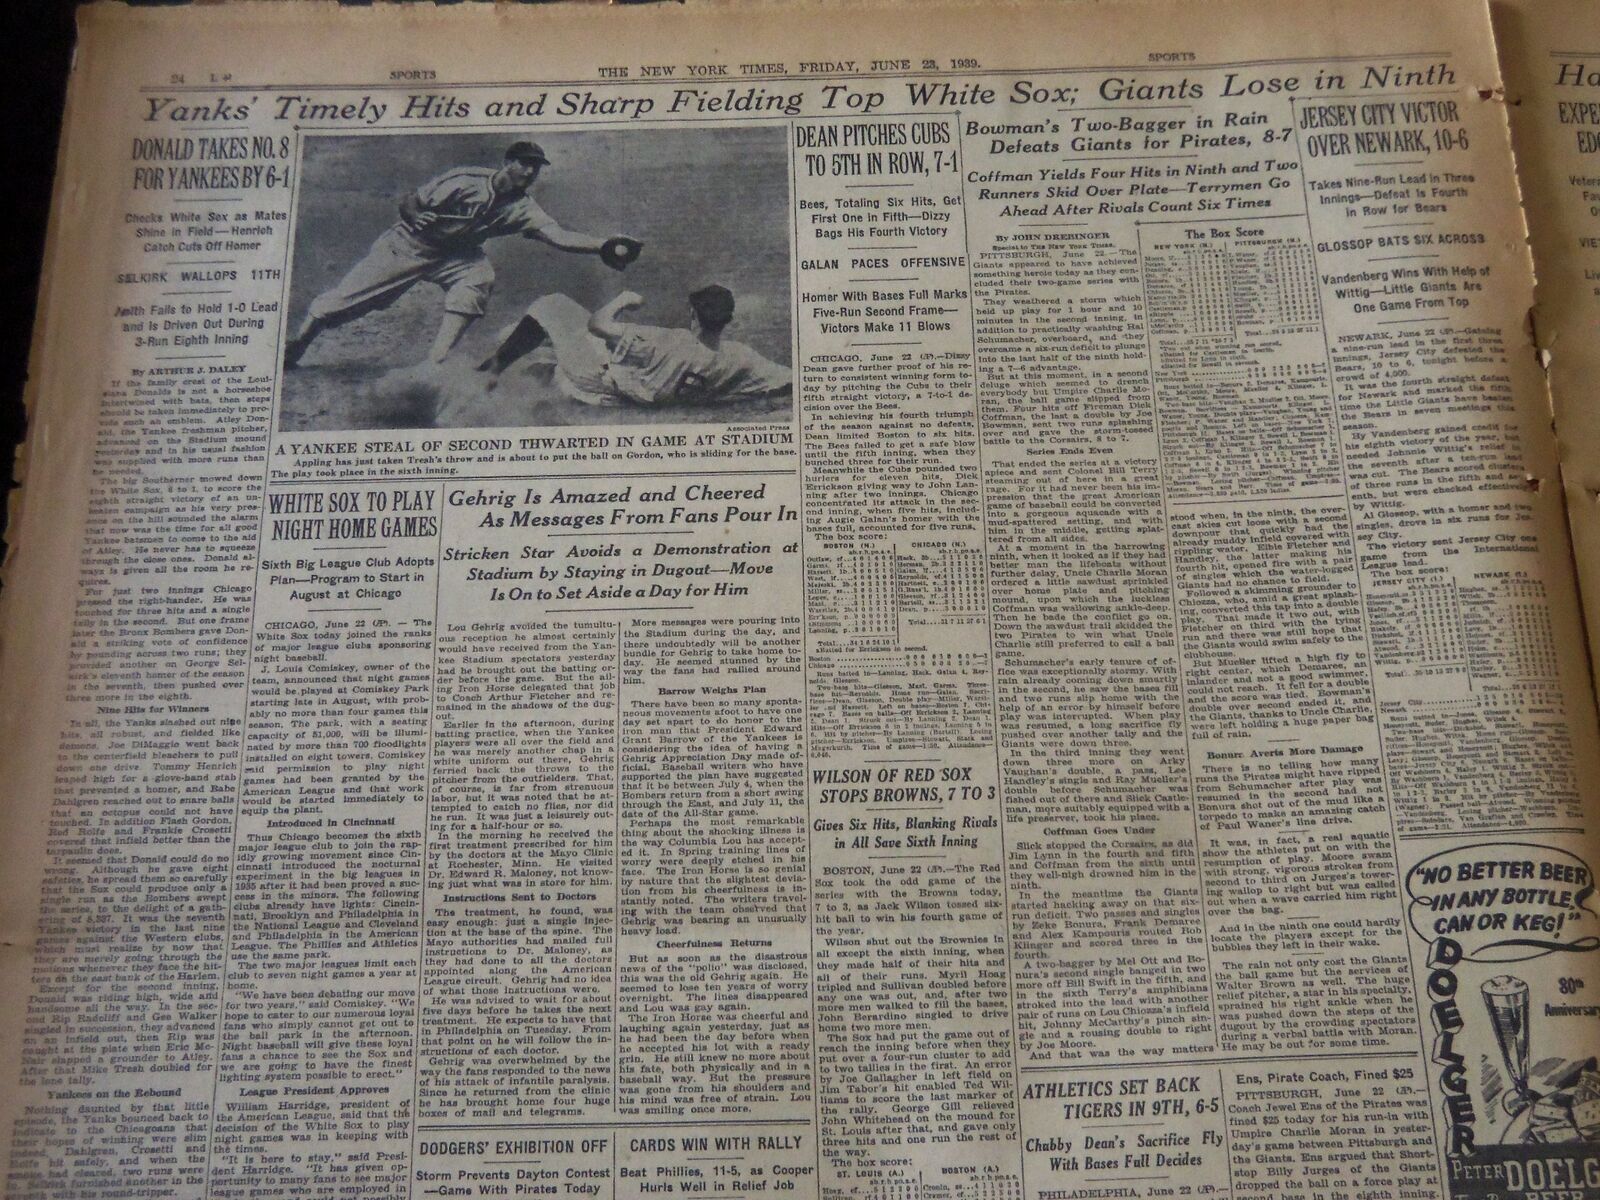 1939 JUNE 23 NEW YORK TIMES - GEHRIG AMAZED AND CHEERED - NT 6008